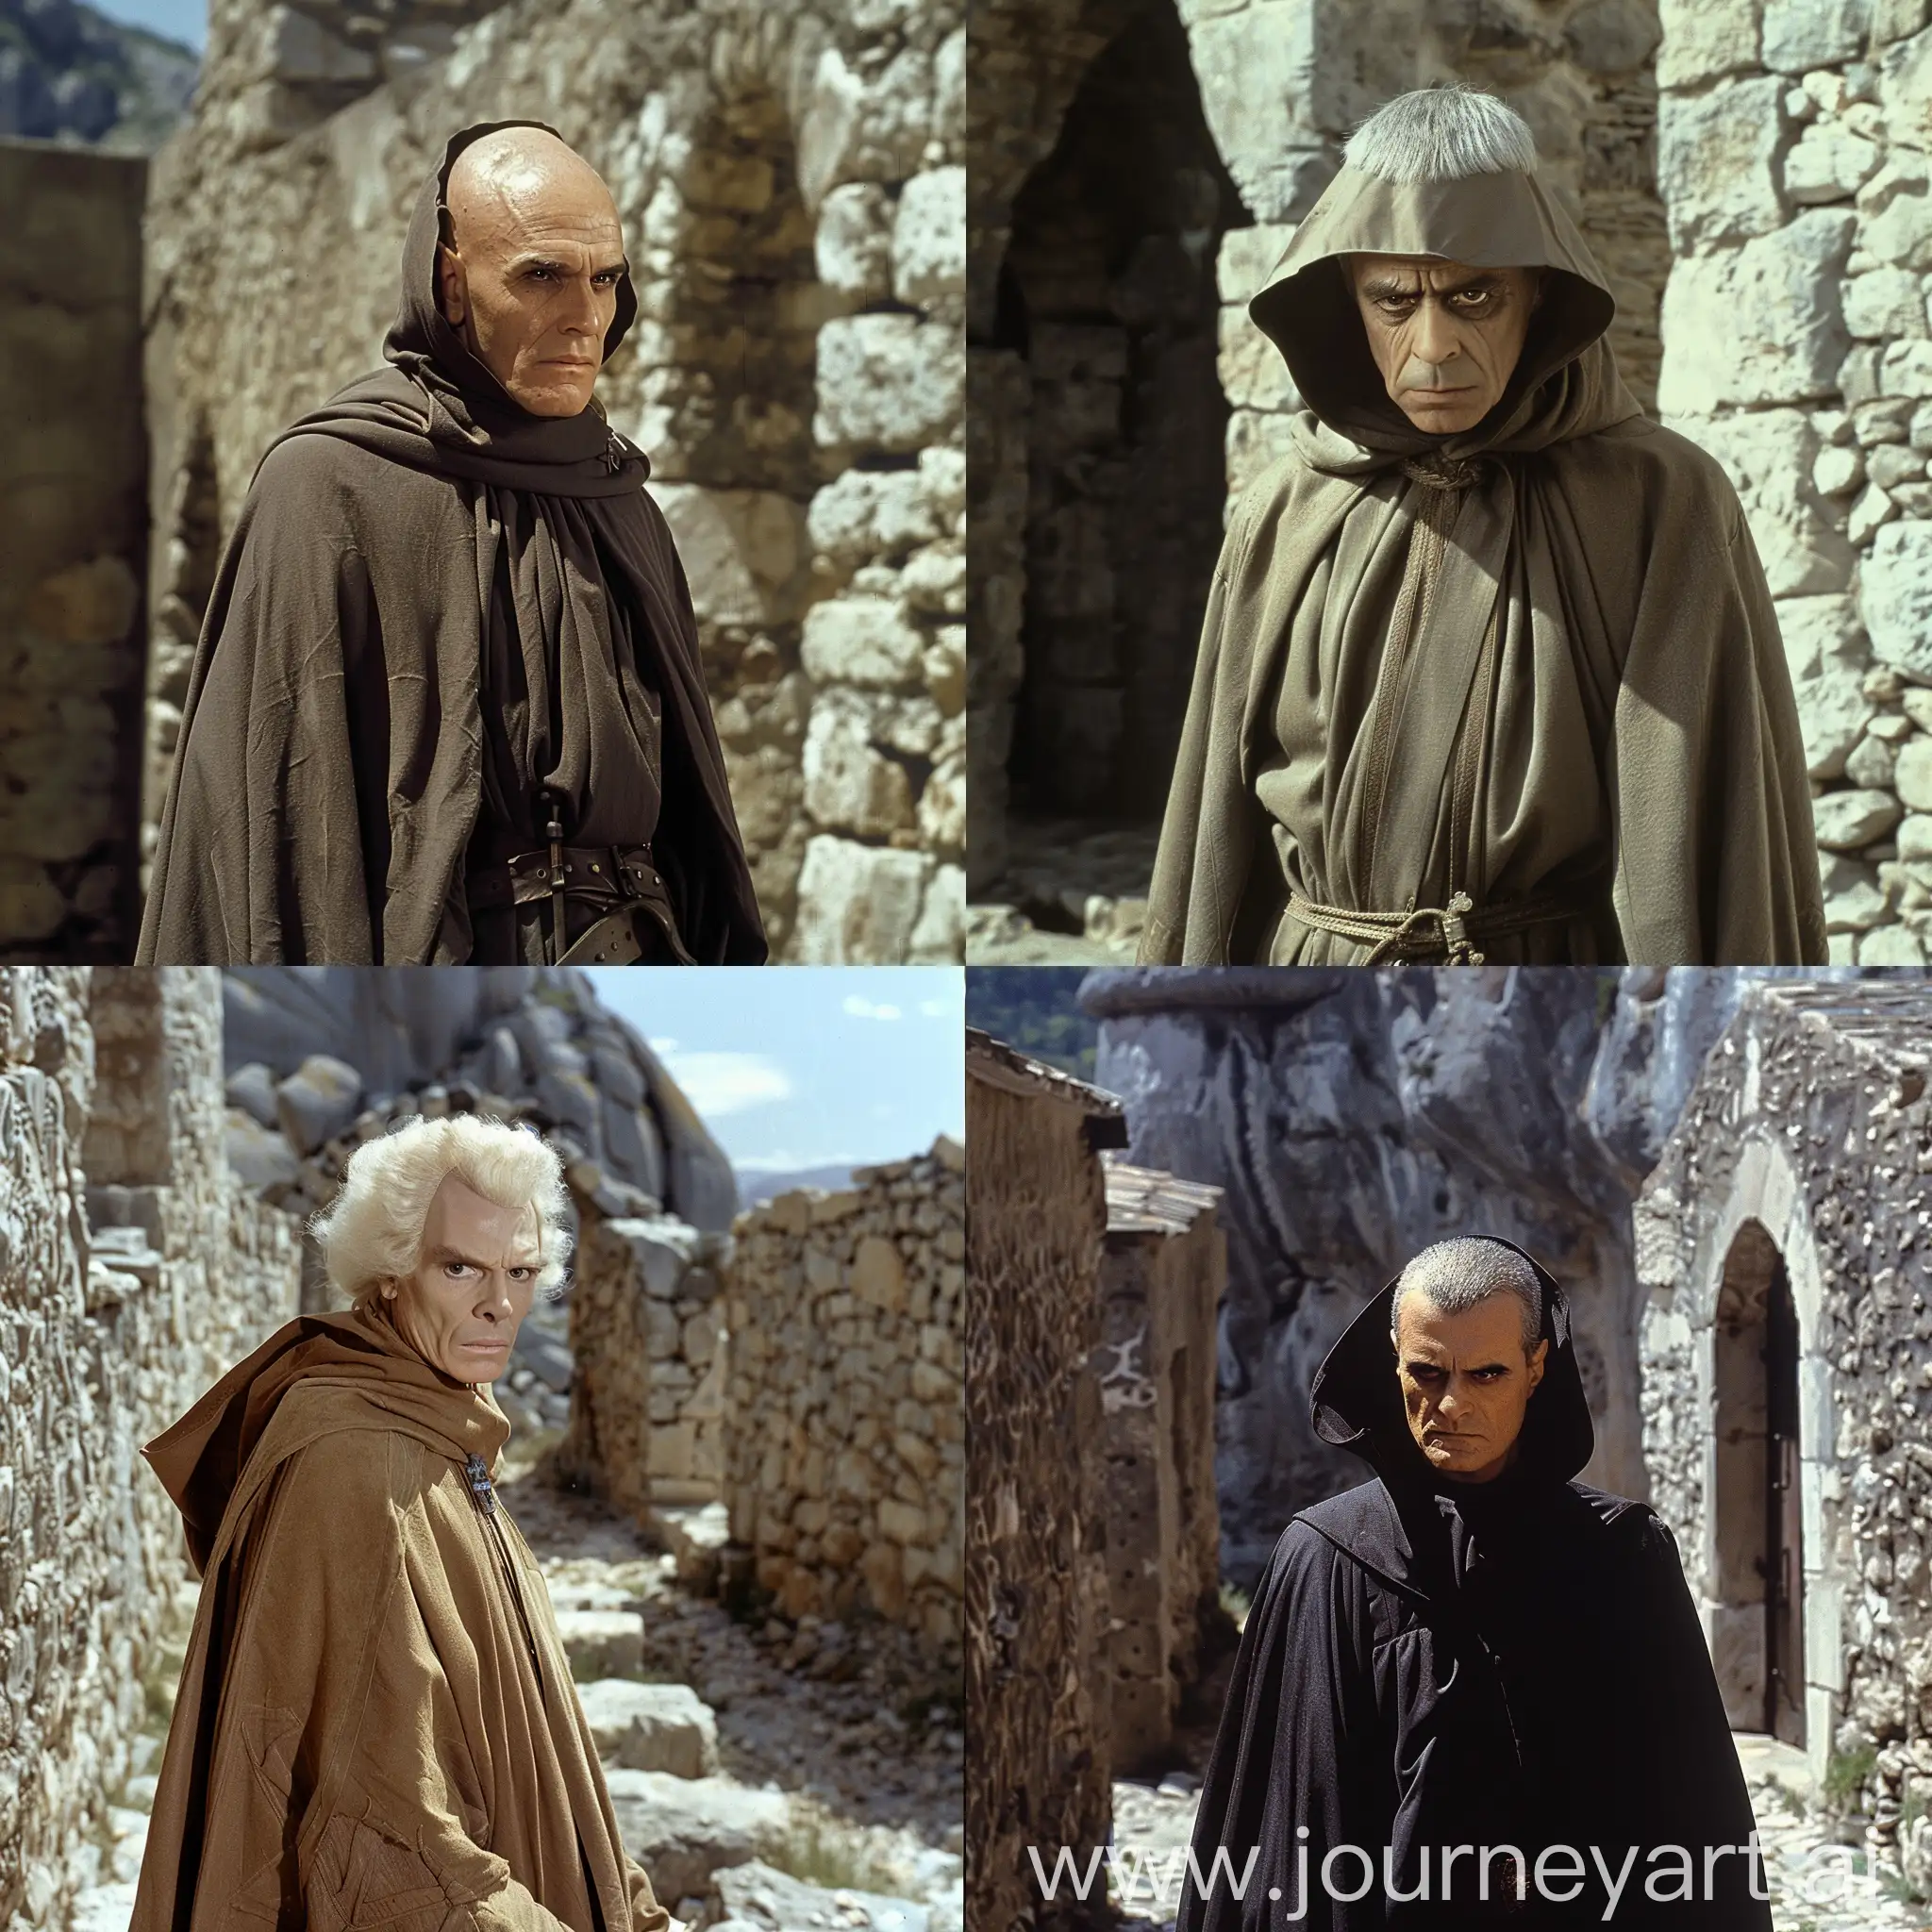 dvd screenengrabs character/High Inquisitor in a monastic robe and with a clinic hairstyle in the middle of stone walls 1980 style